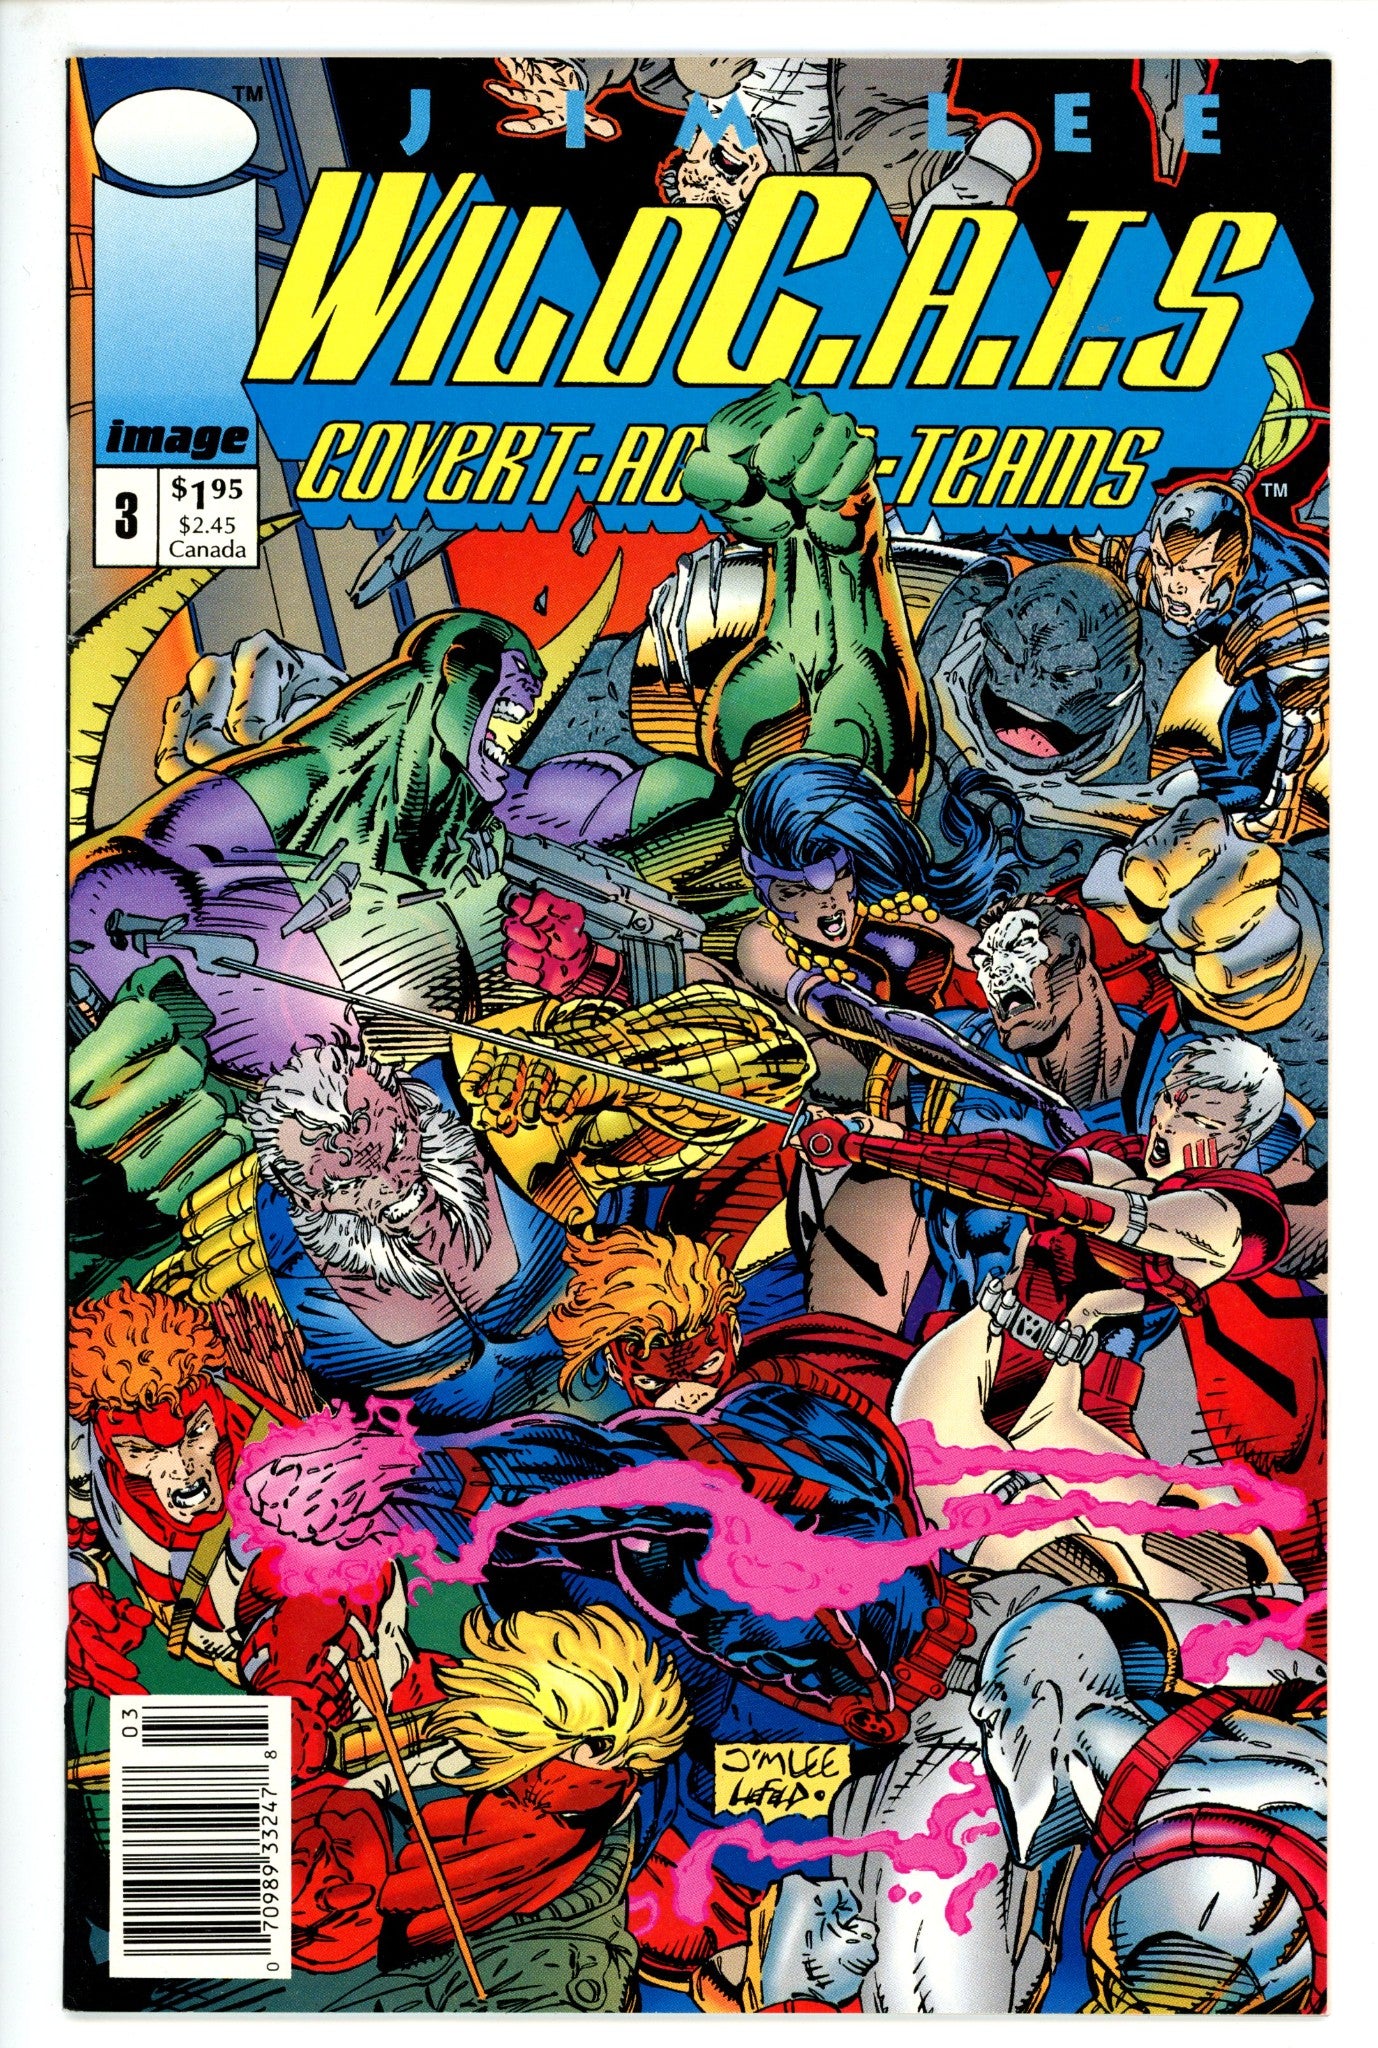 WildC.A.T.S: Covert Action Teams Vol 1 3 Newsstand